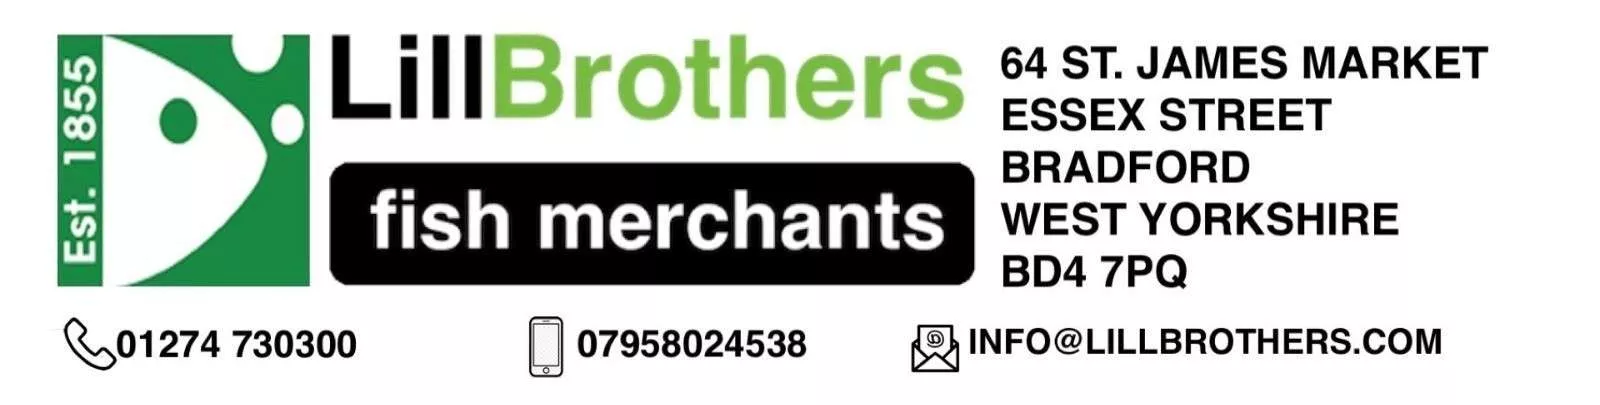 Lill Brothers Wholesale Fish Merchants 64 ST. JAMES MARKET ESSEX STREET BRADFORD WEST YORKSHIRE BD47PQ Tel: 01274 730300 Local Home Delivery